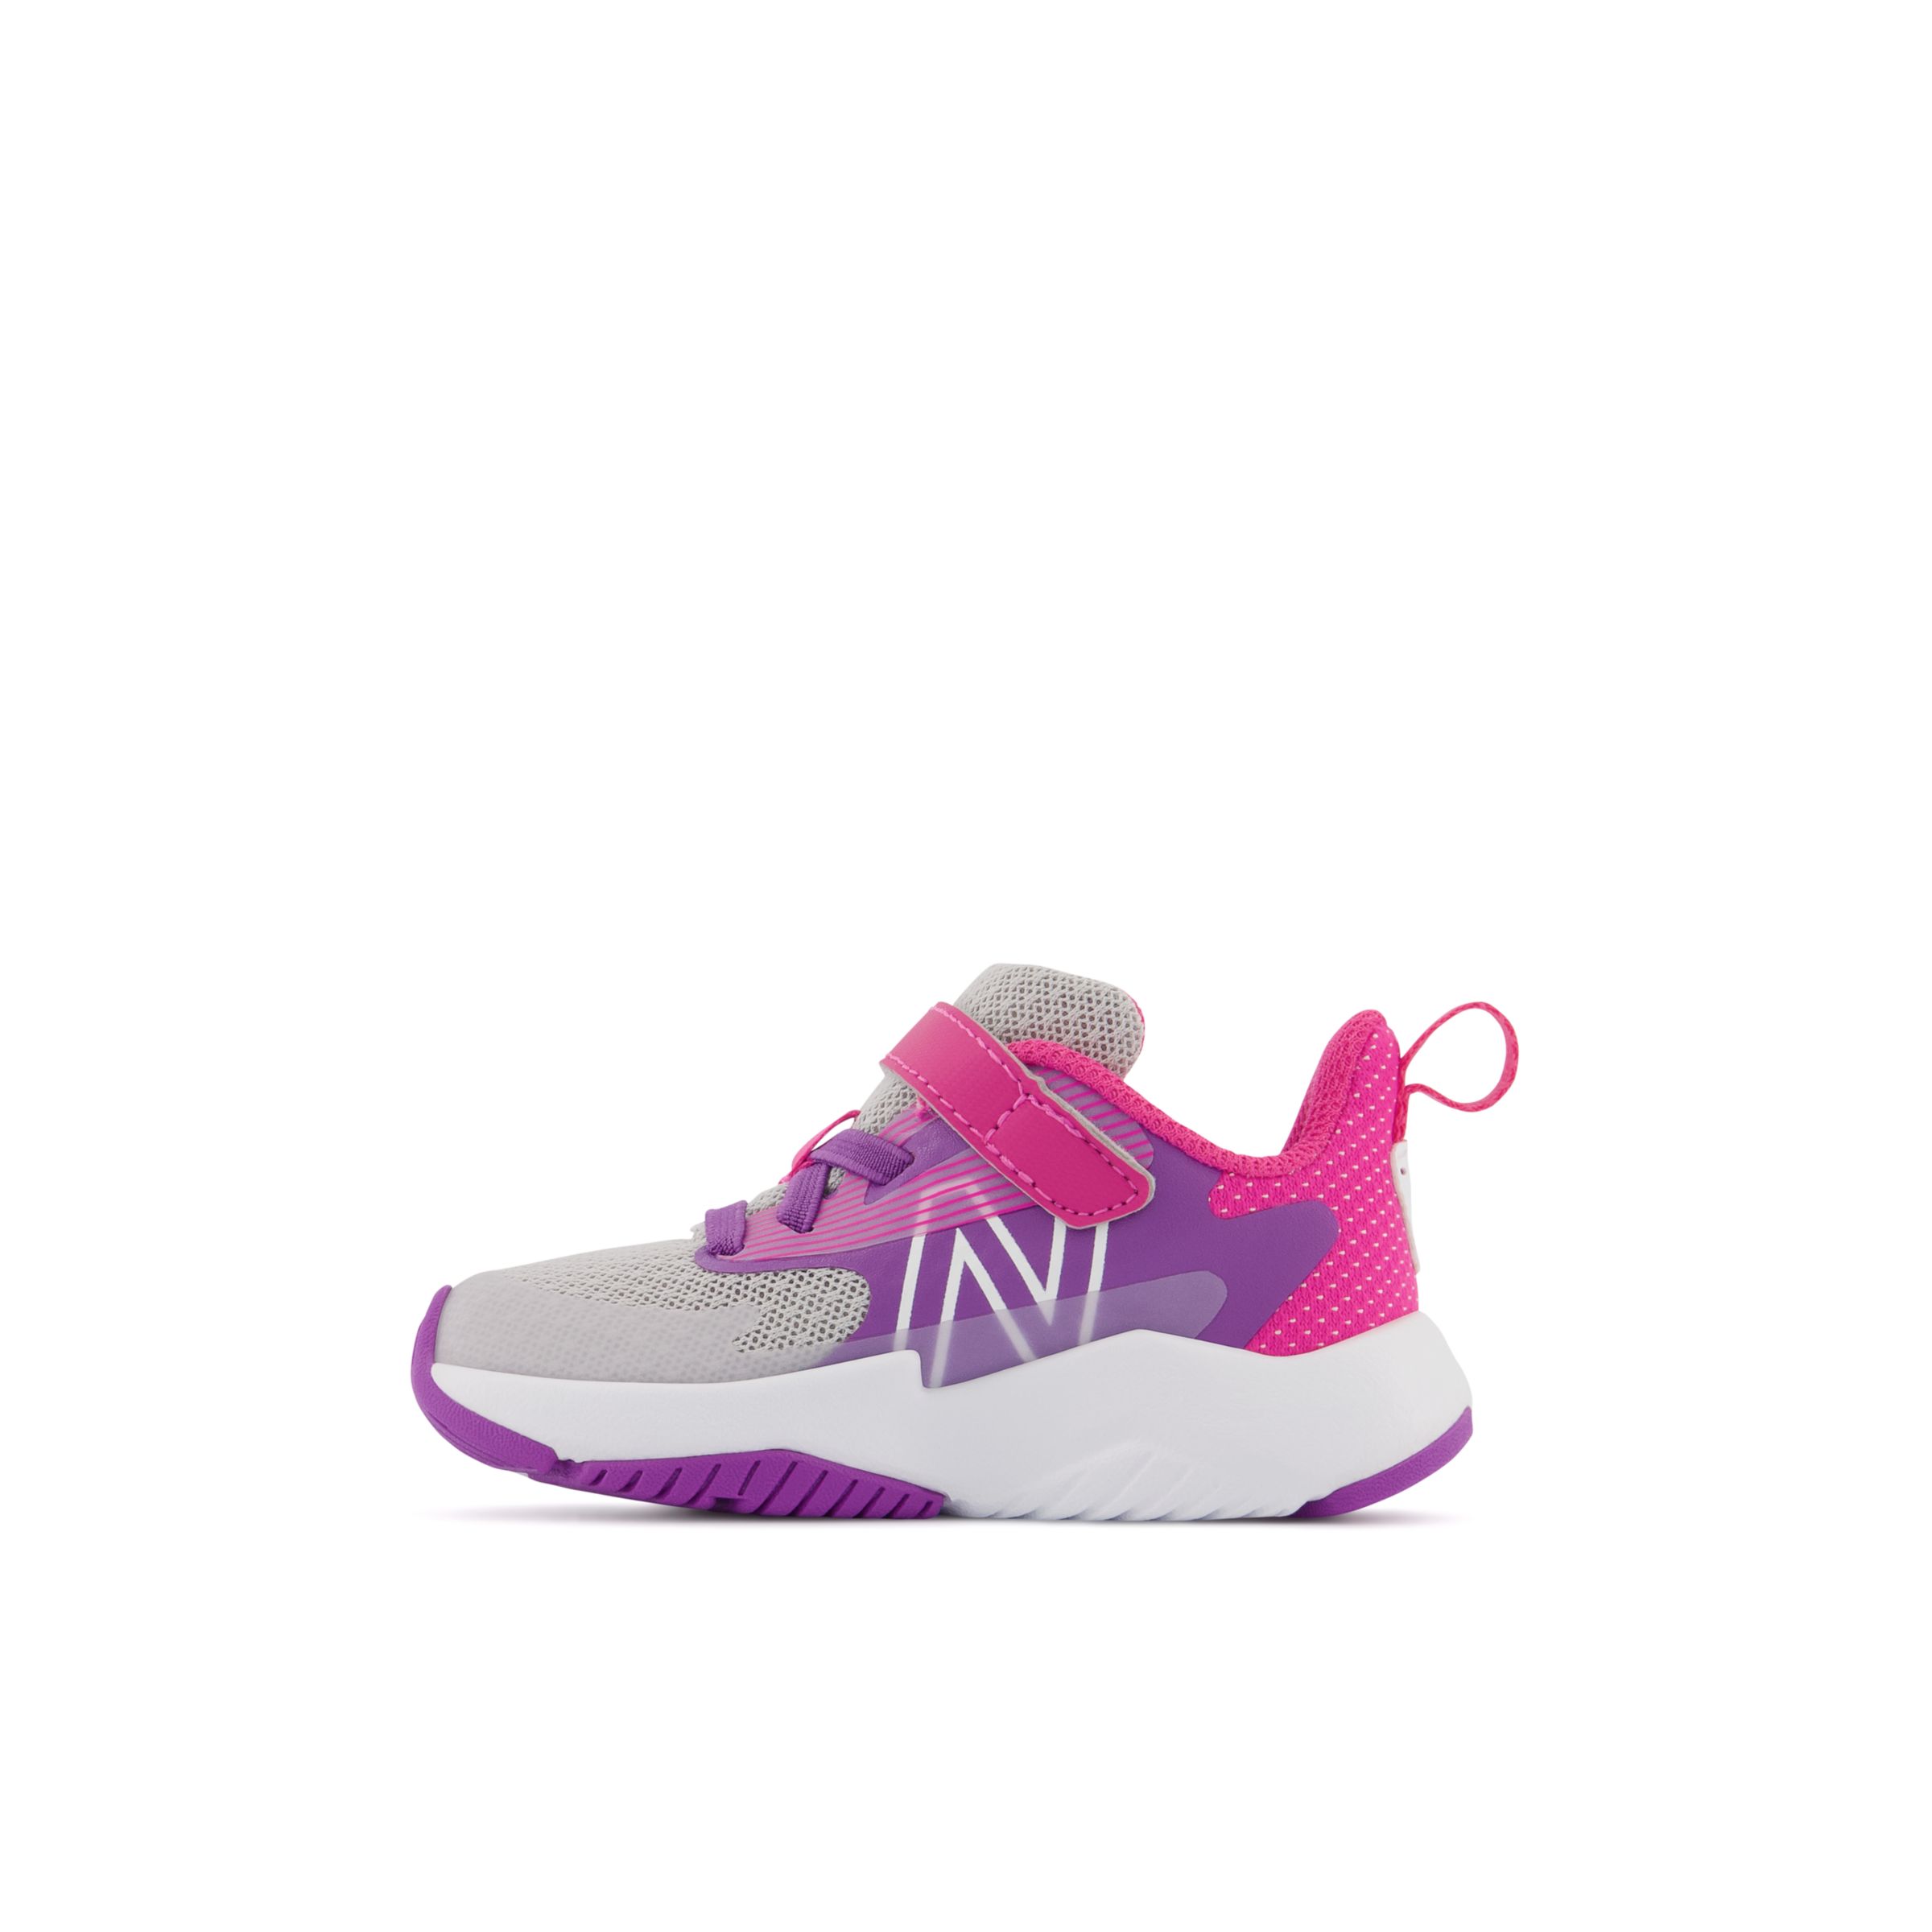 New Balance Girls' Playgruv V2 Bungee Lace Running Sneakers (Youth